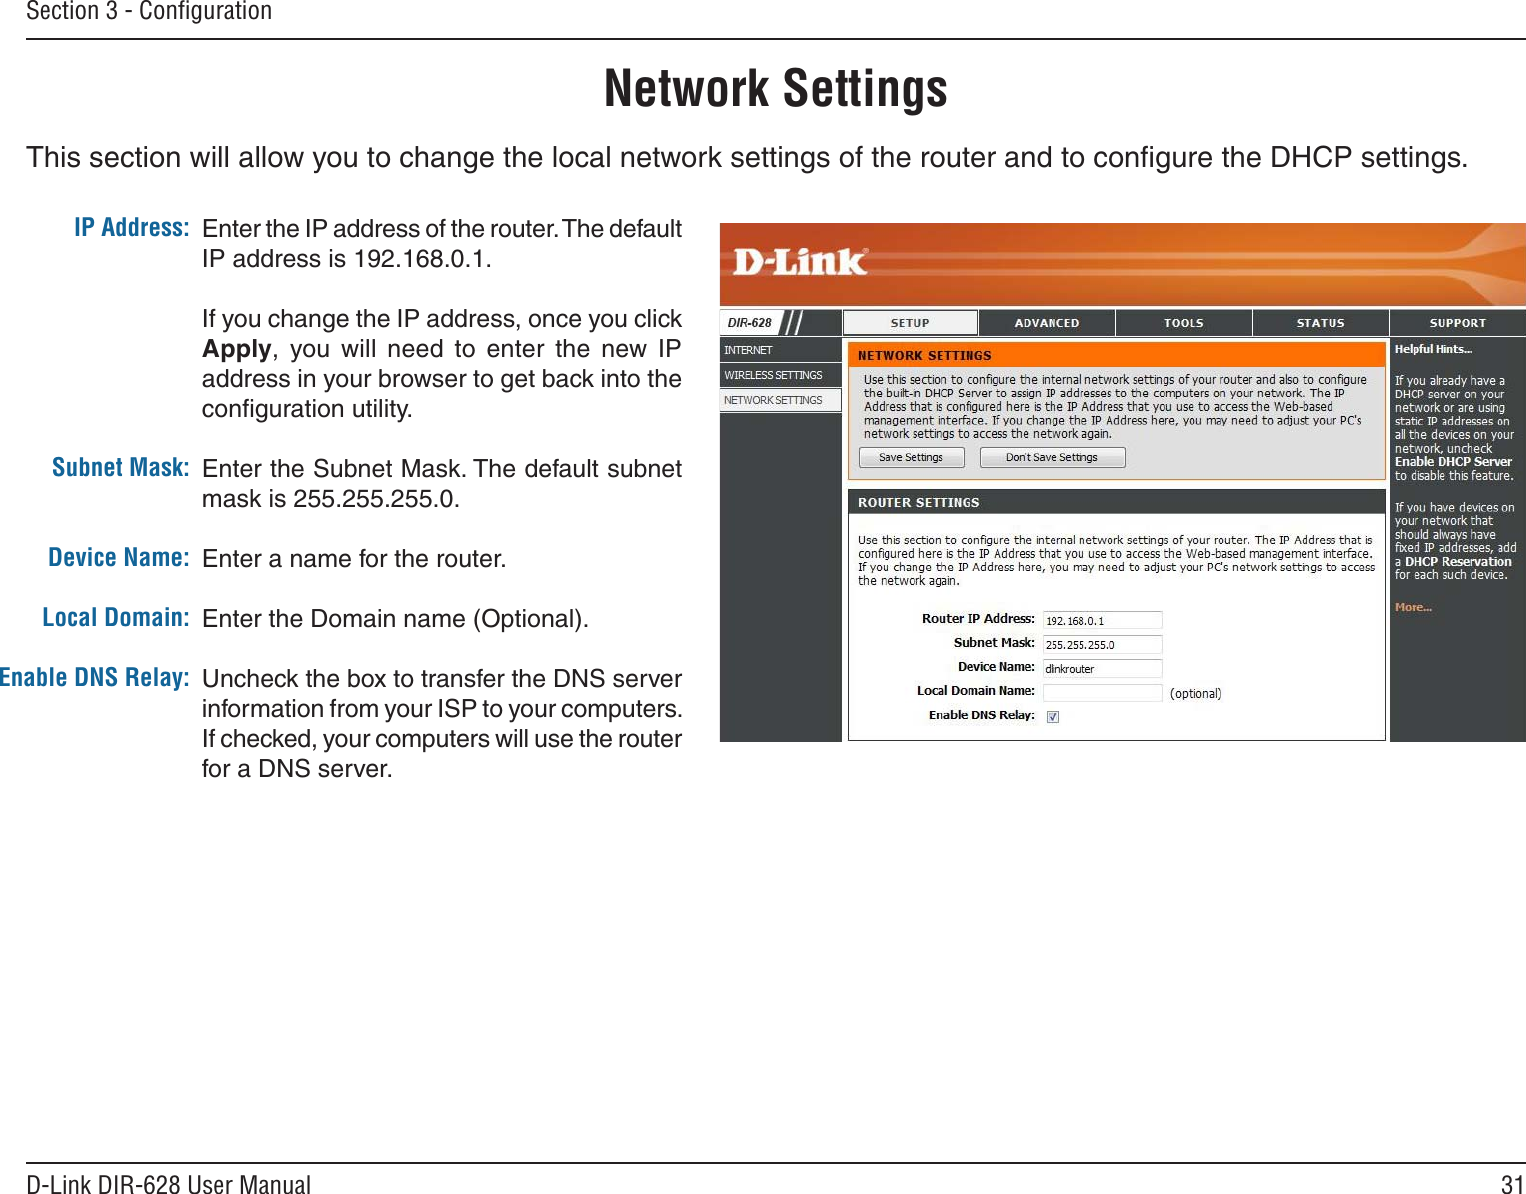 31D-Link DIR-628 User ManualSection 3 - ConﬁgurationThis section will allow you to change the local network settings of the router and to conﬁgure the DHCP settings.Network SettingsEnter the IP address of the router. The default IP address is 192.168.0.1.If you change the IP address, once you click Apply,  you  will  need  to  enter  the  new  IP address in your browser to get back into the conﬁguration utility.Enter the Subnet Mask. The default subnet mask is 255.255.255.0.Enter a name for the router.Enter the Domain name (Optional).Uncheck the box to transfer the DNS server information from your ISP to your computers. If checked, your computers will use the router for a DNS server.IP Address:Subnet Mask:Device Name:Local Domain:Enable DNS Relay: